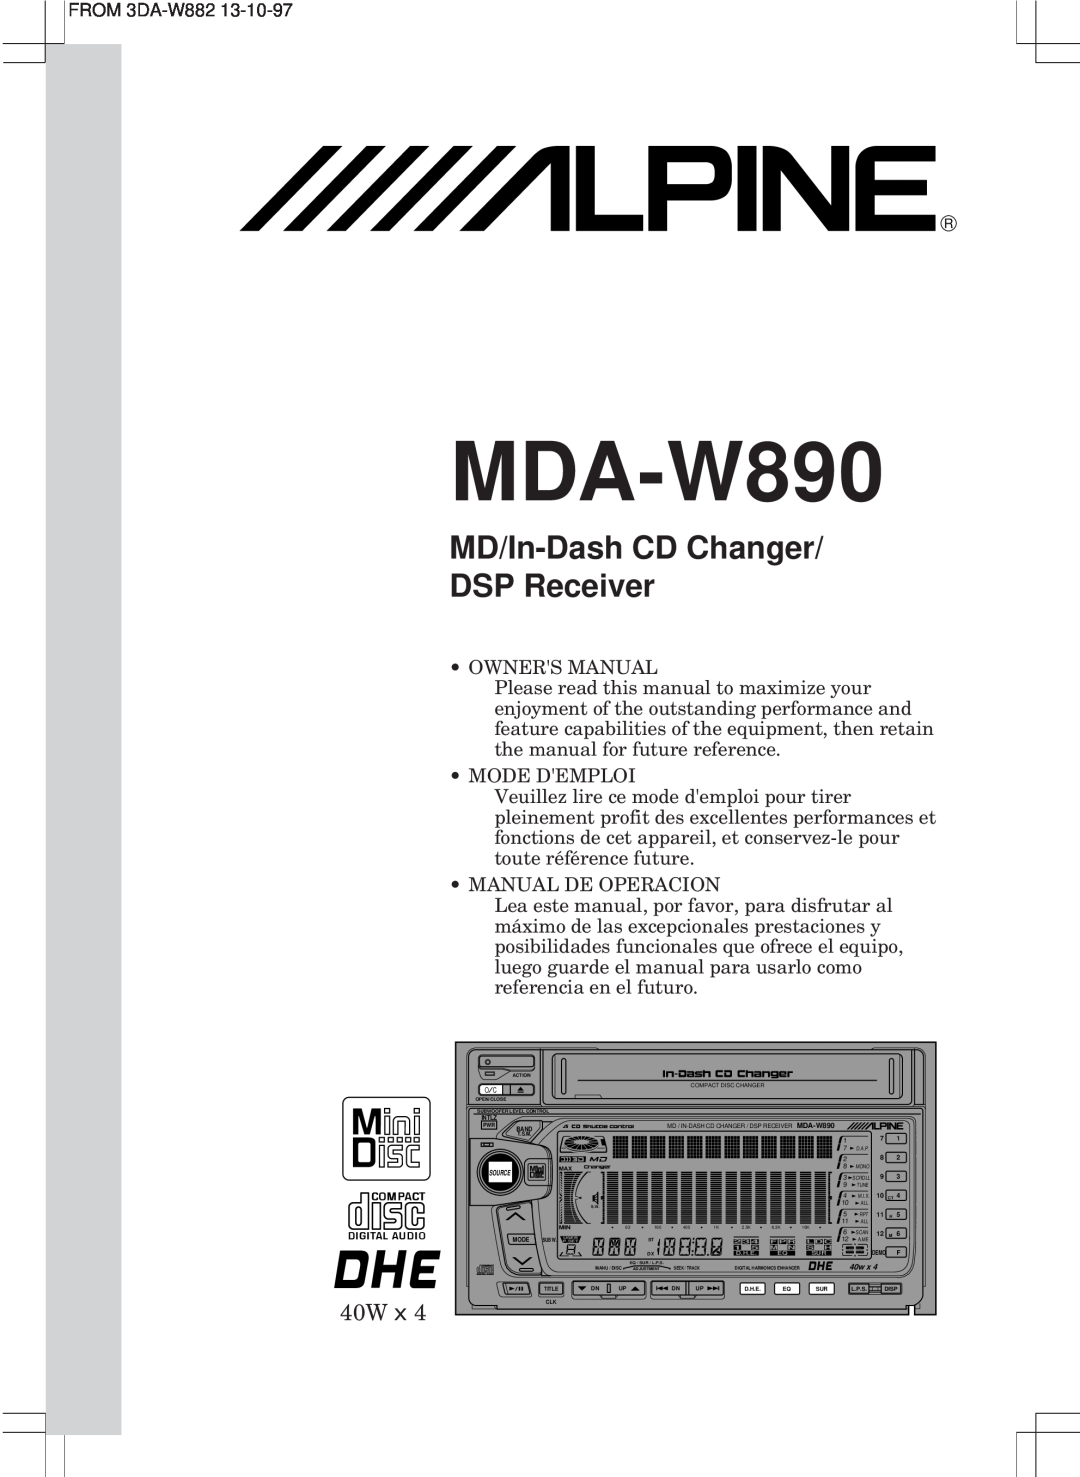 Alpine MDA-W890 owner manual MD/In-Dash CD Changer DSP Receiver, 40W x 